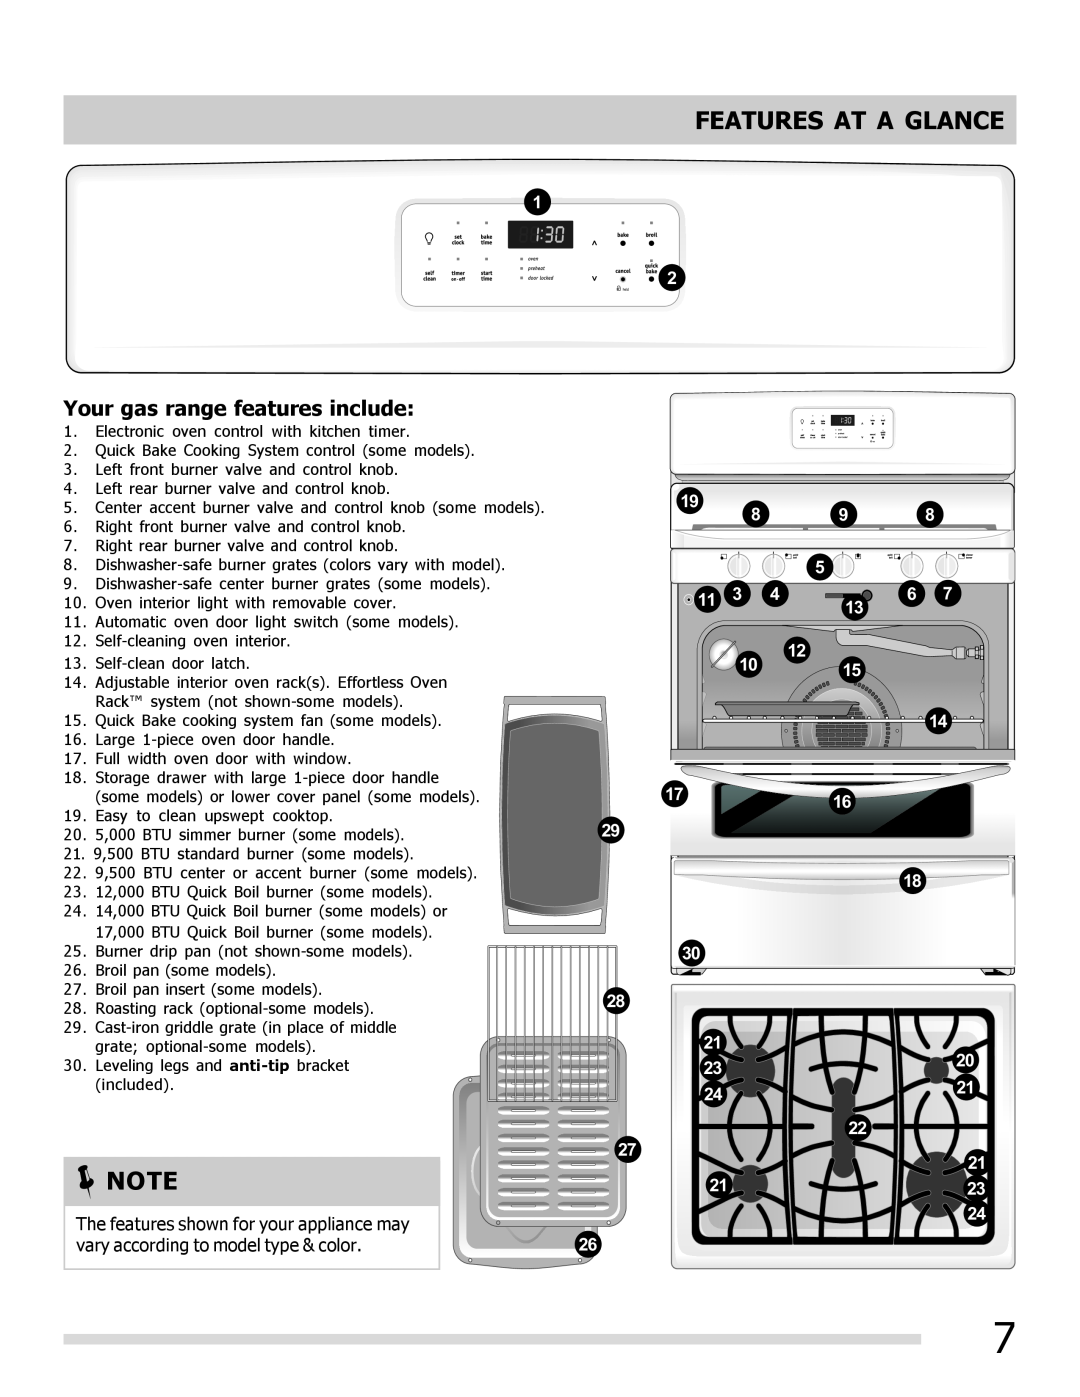 Frigidaire 316901309 important safety instructions Features At A Glance, Your gas range features include 